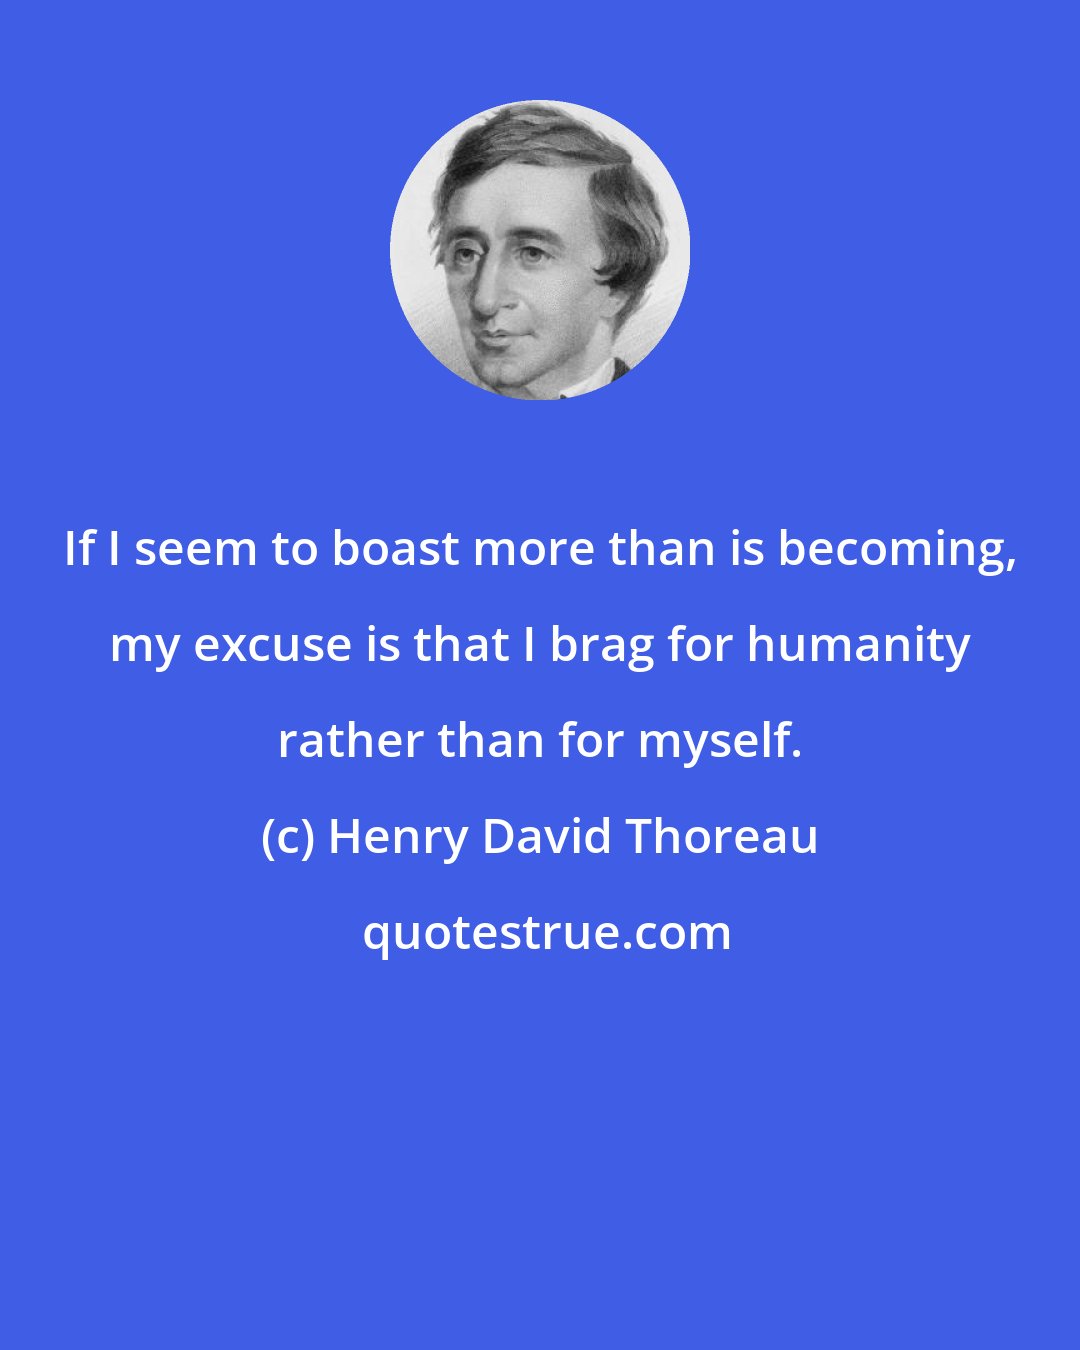 Henry David Thoreau: If I seem to boast more than is becoming, my excuse is that I brag for humanity rather than for myself.